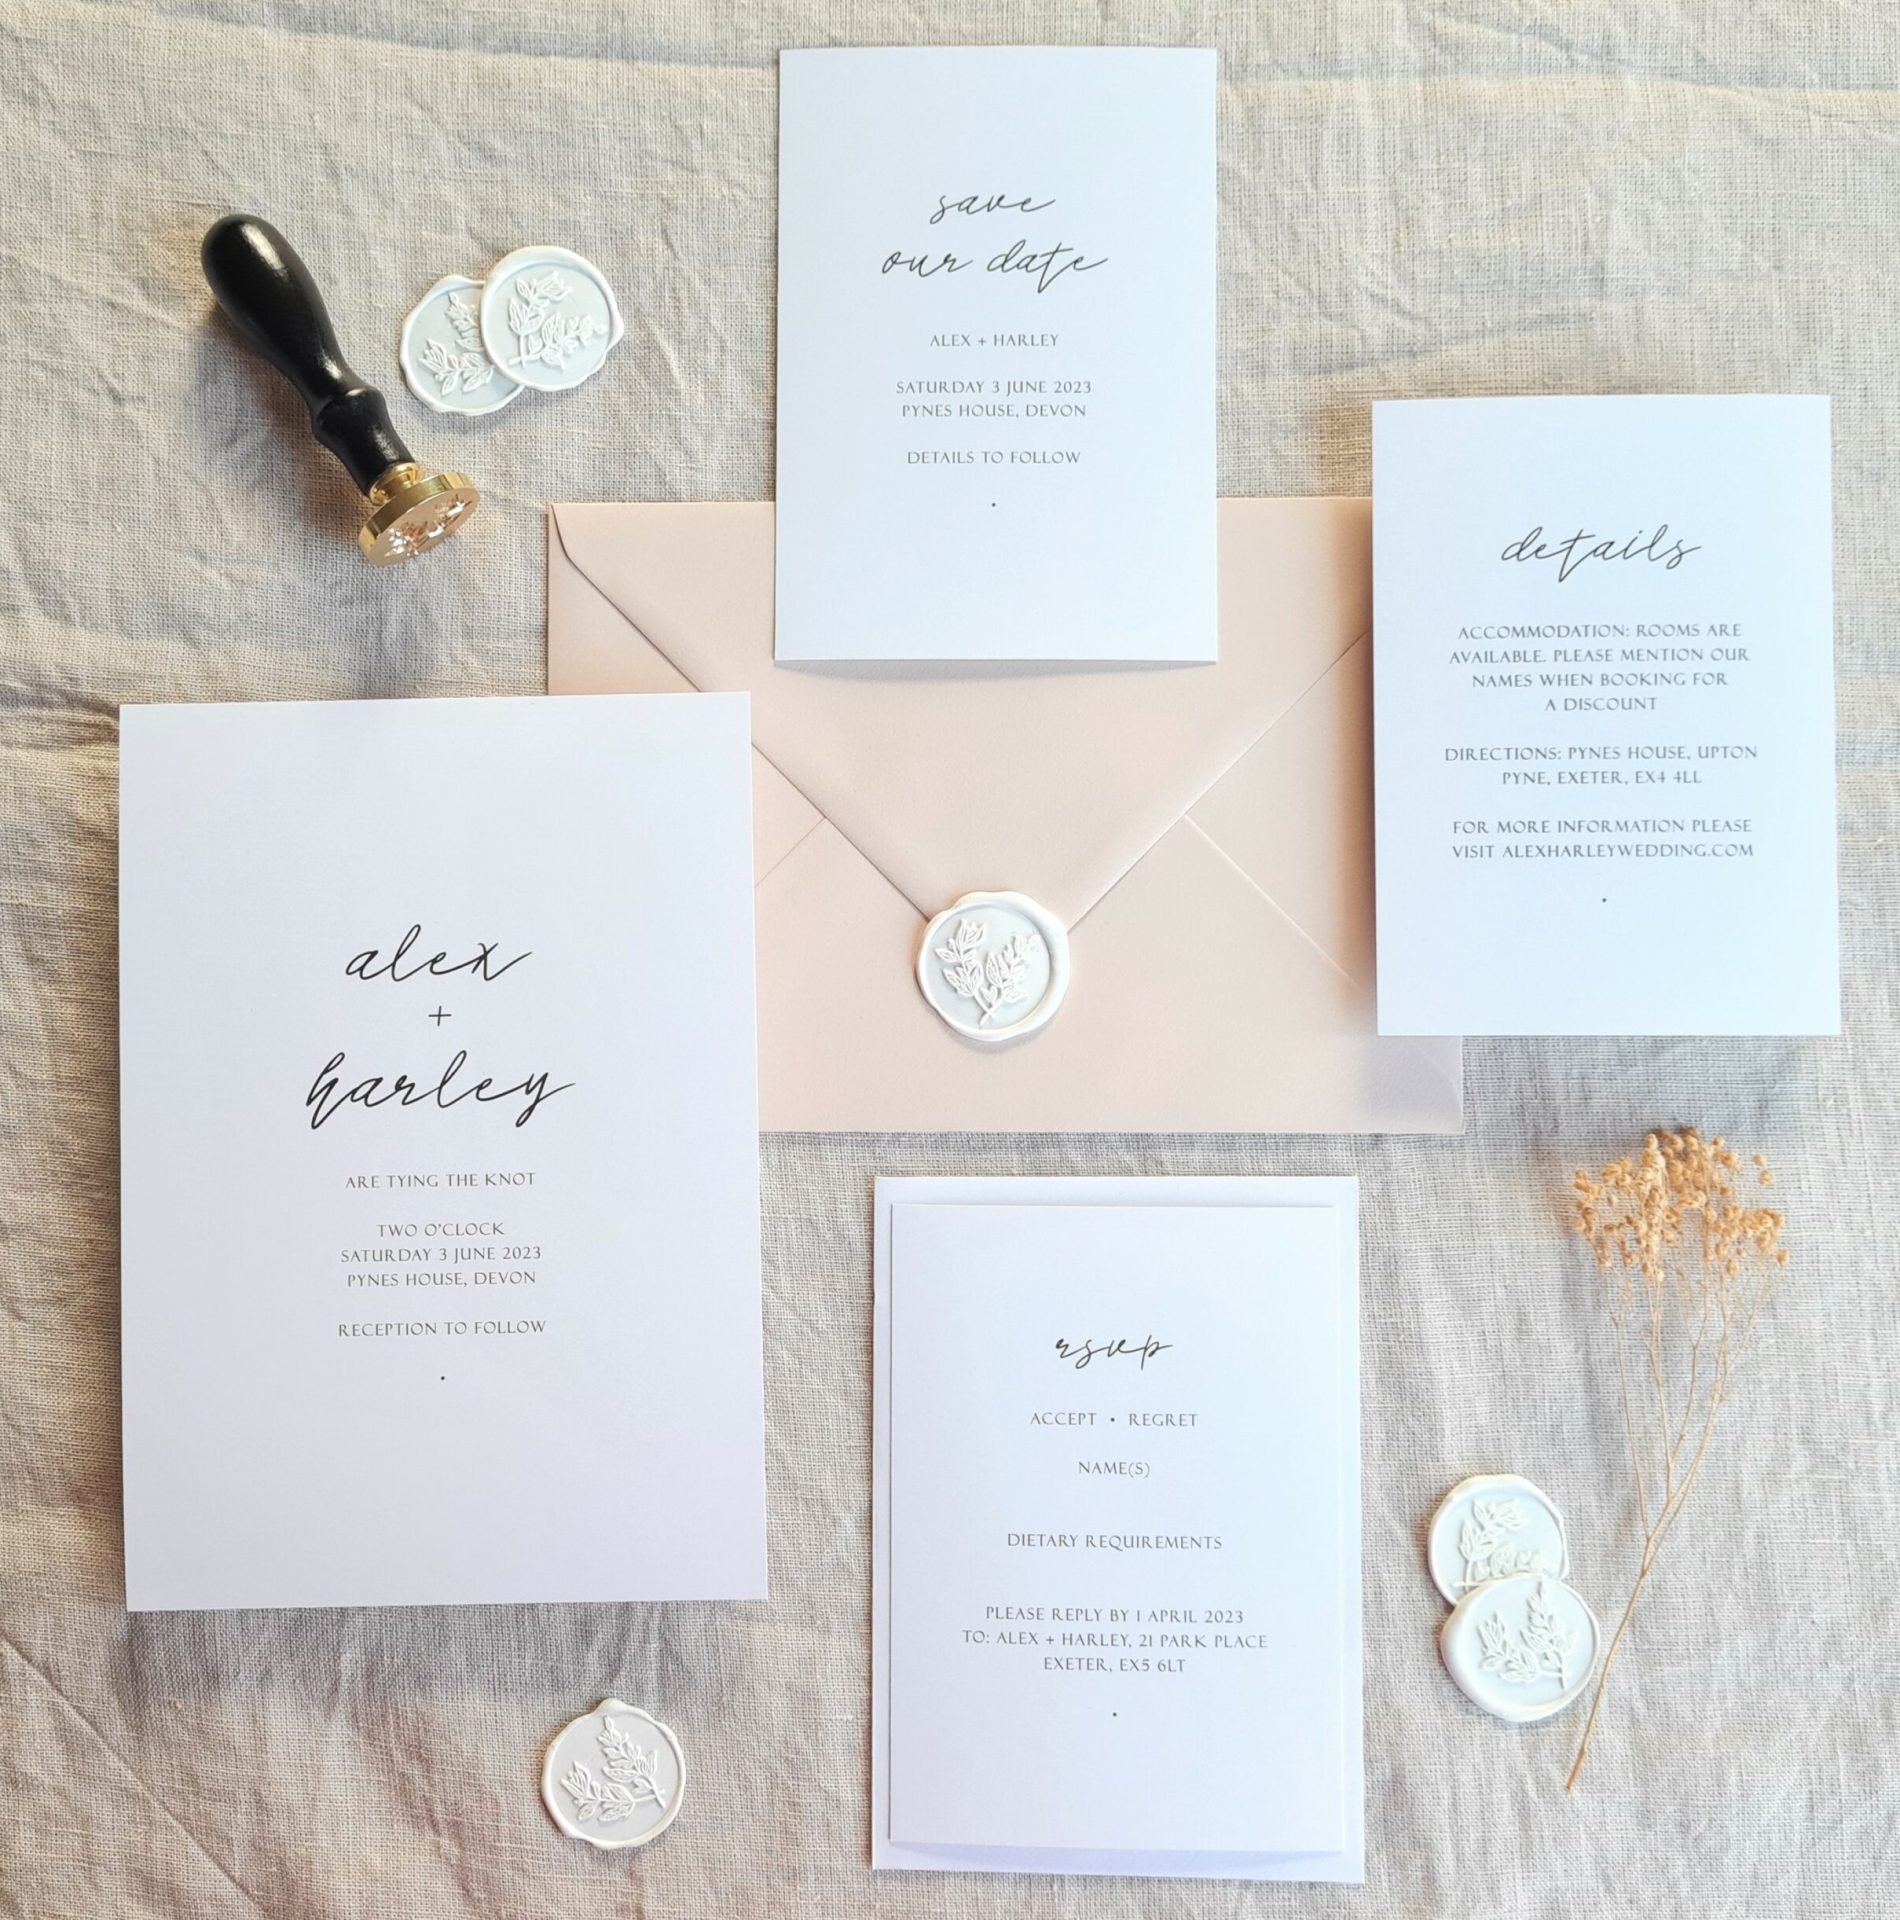 This is a flat lay image of a black and white modern wedding invitation suite set on a beige linen background with various dried flowers scattered around it. The suite includes a save the date card, an invitation, an RSVP card, and a details card. The save the date card is a simple black and white design, while the invitation features bold black text on a white background, with a black and gold wax stamp and white wax seals.